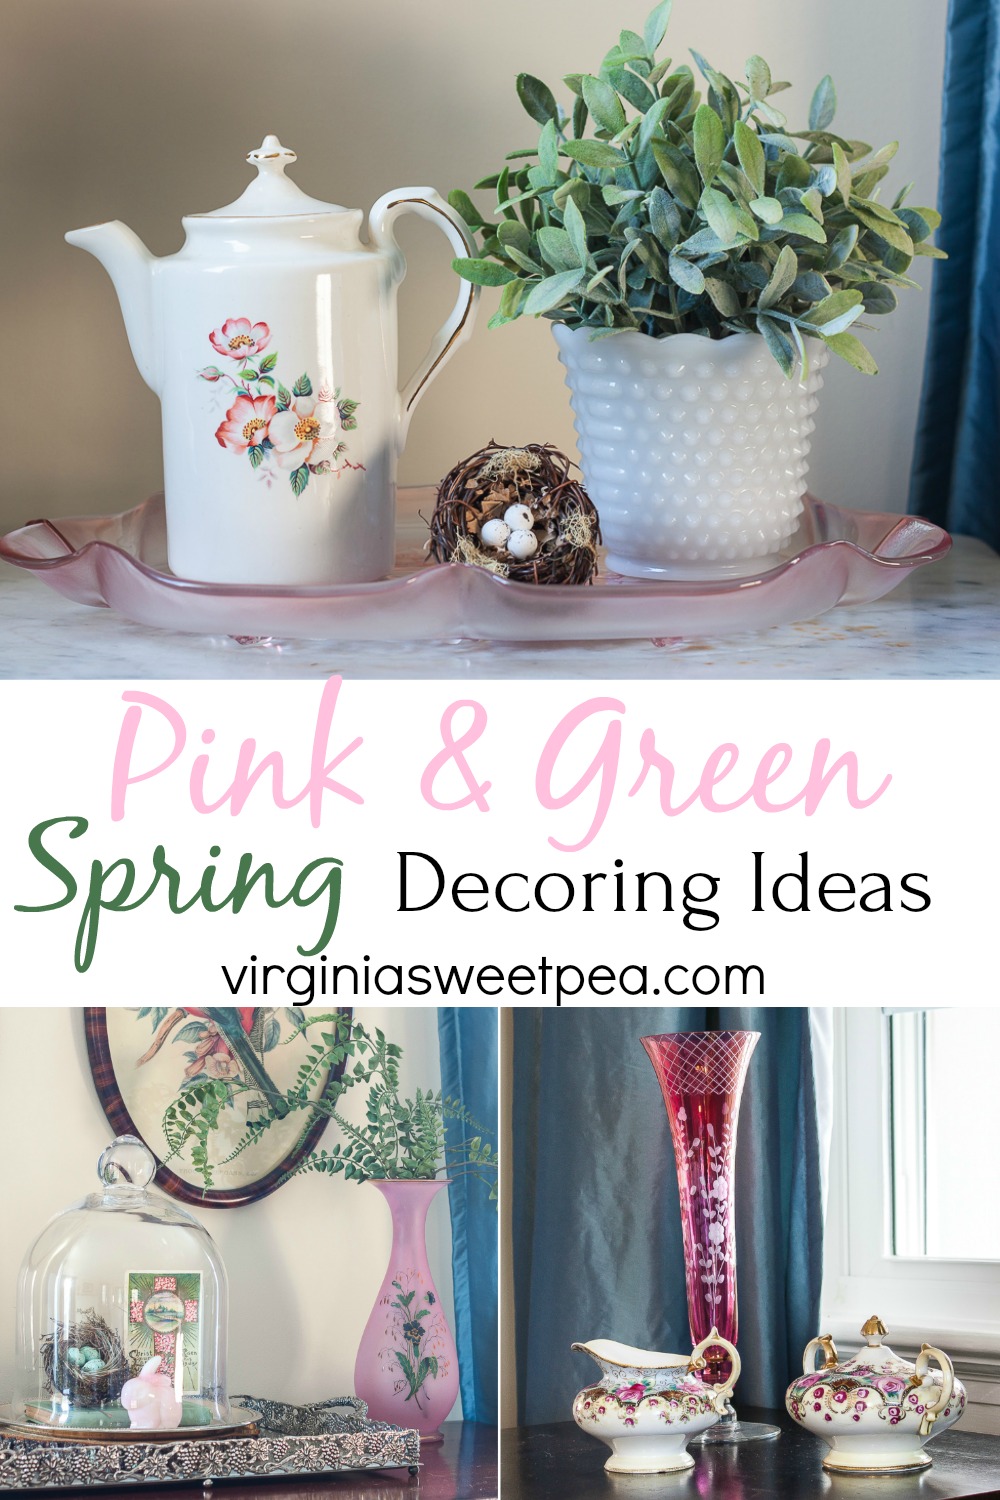 Pink & Green Spring Decorating Ideas Graphic